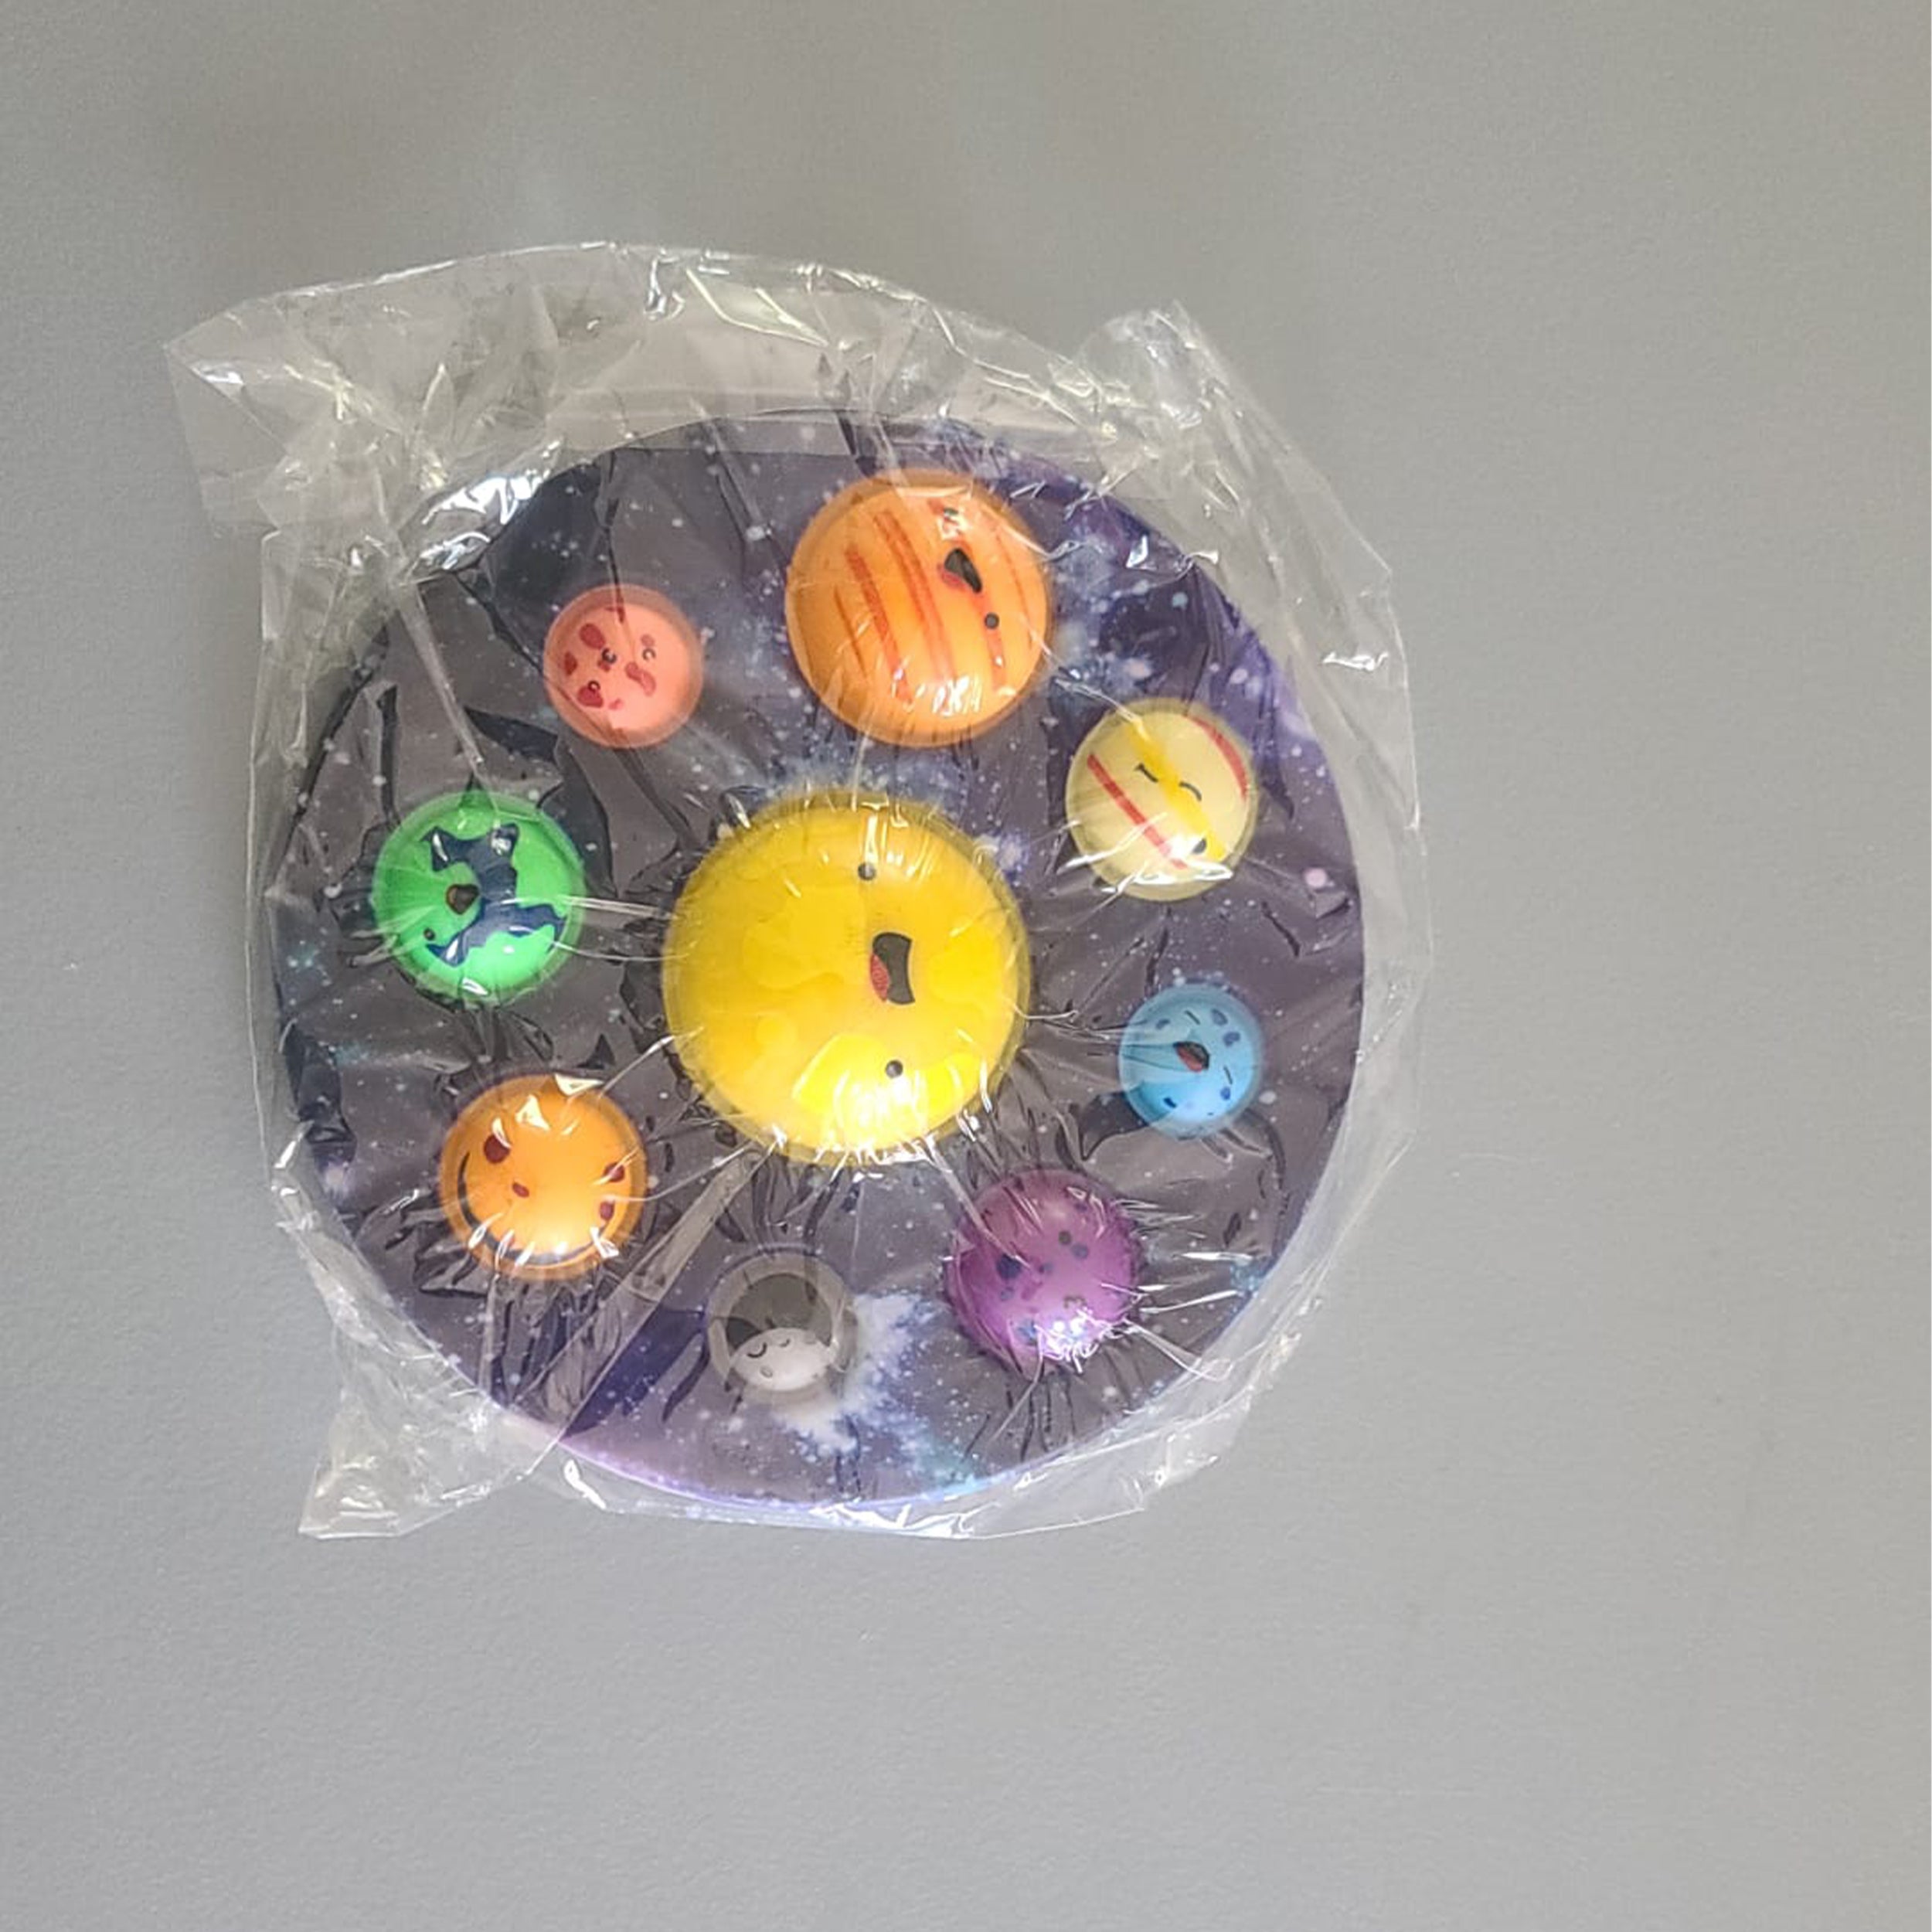 Packing Image Of Simple Dimple Planet Pop It Fidget Toy